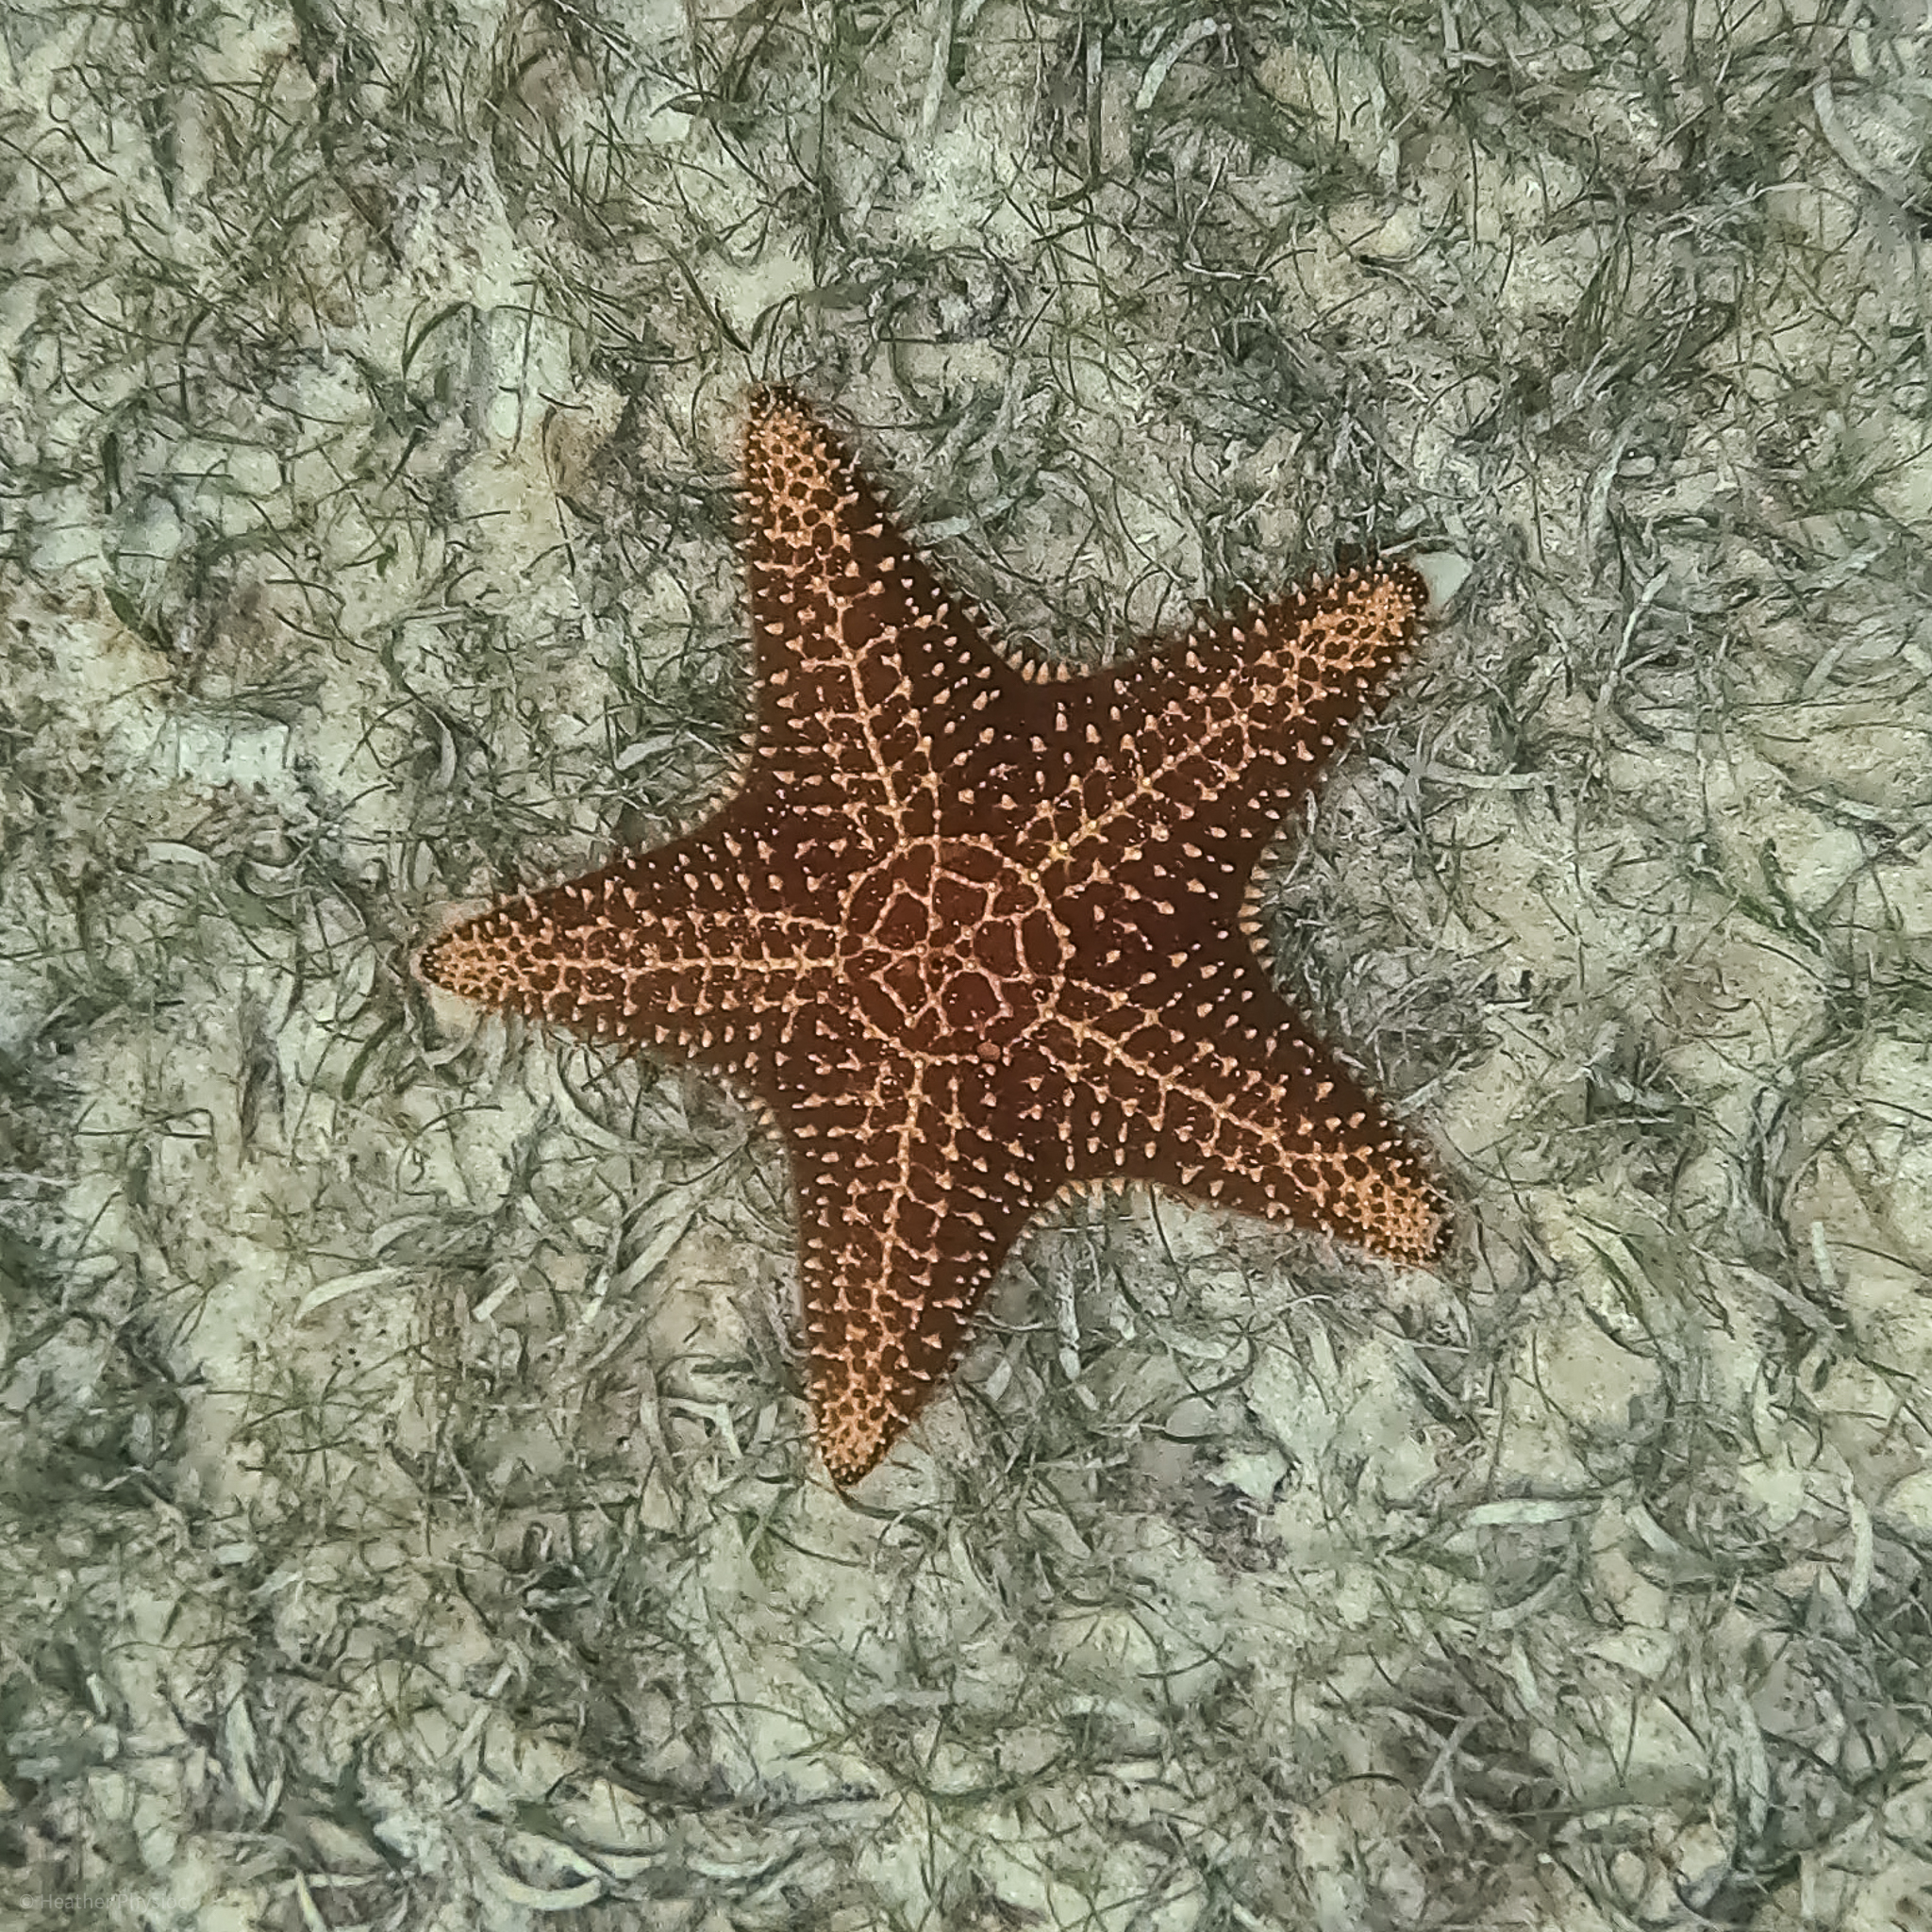 A red and tan starfish rests on the seafloor, its vibrant pattern standing out against the muted background of sea grass in Akumal Bay, Mexico.